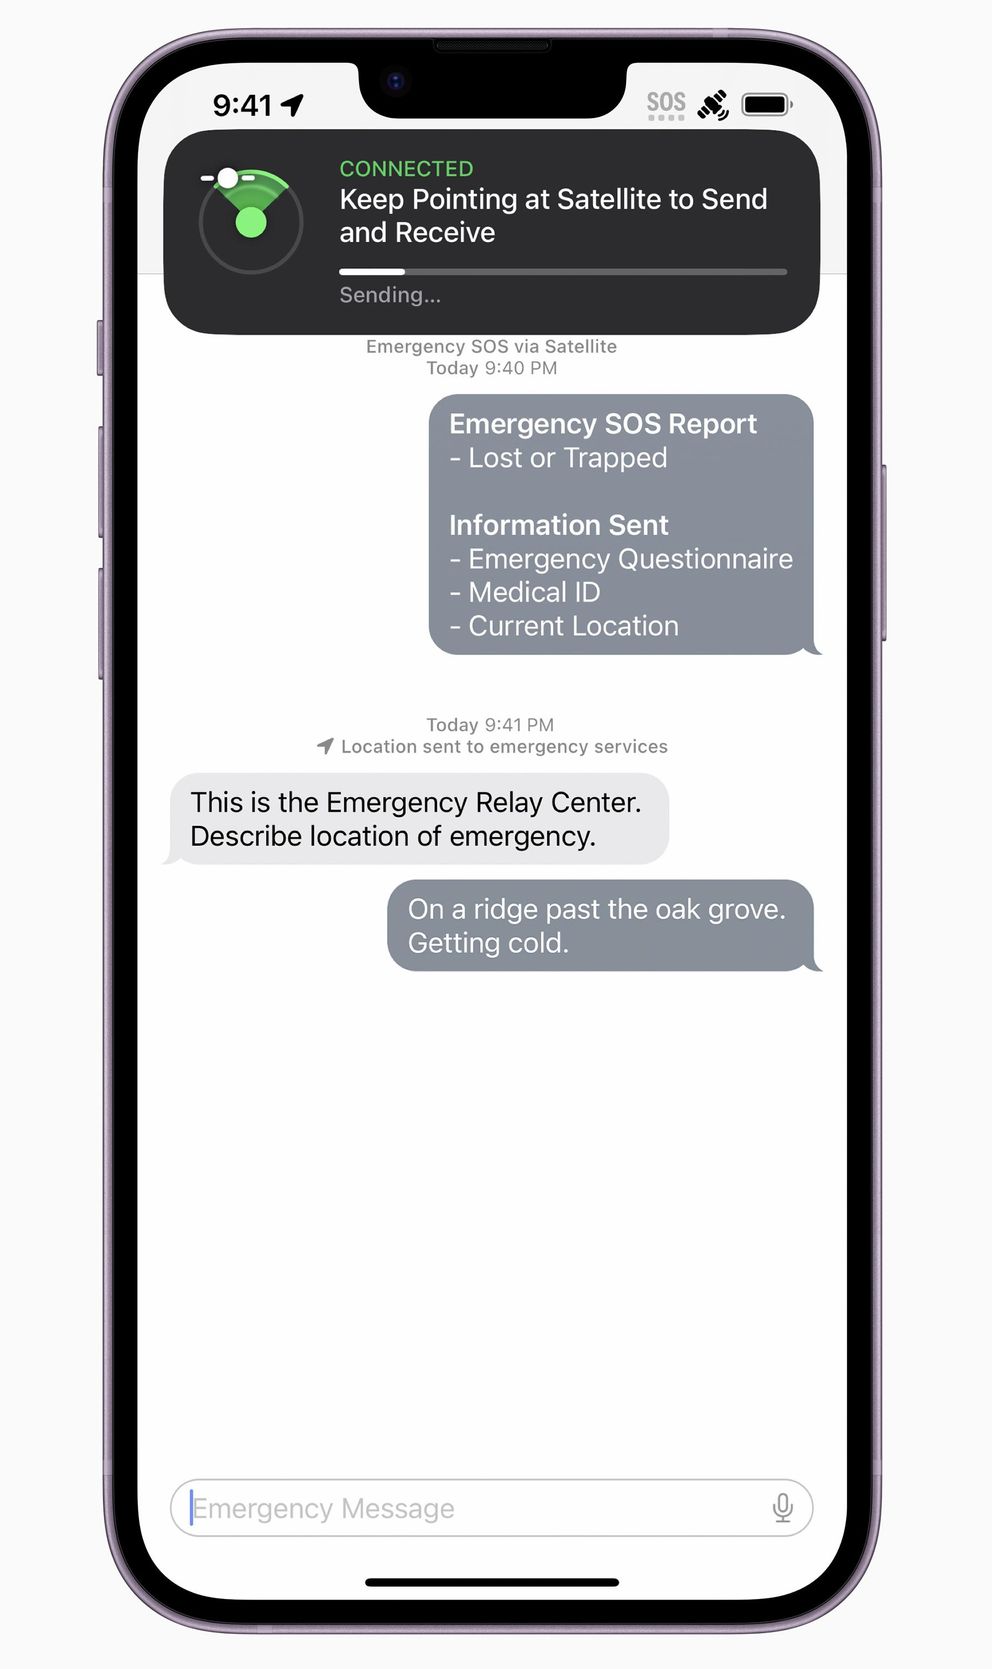 A phone screen display mockup. At the top of the screen, a black box says \u201ckeep point at satellite to send and receive\u201d with a progress bar slightly filled below it. Below the box, a text message exchange gives more detailed instructions on how to use the service.